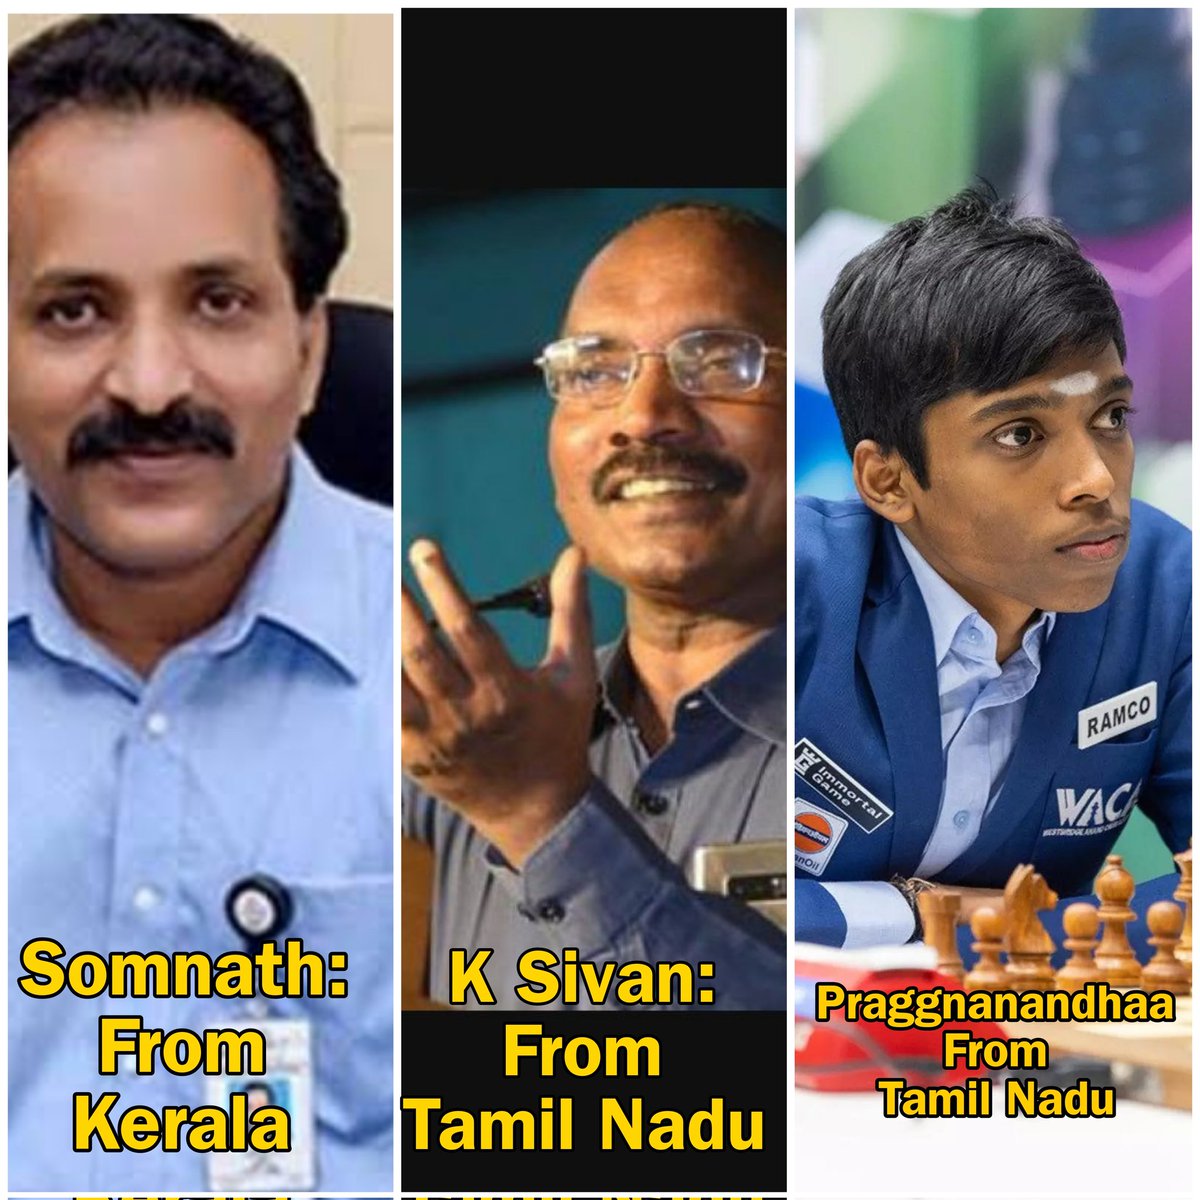 None of them are from BJP ruled states.. 

All these champs are from Kerala & Tamil Nadu, where BJP is Zero. 

#Chandrayaan3